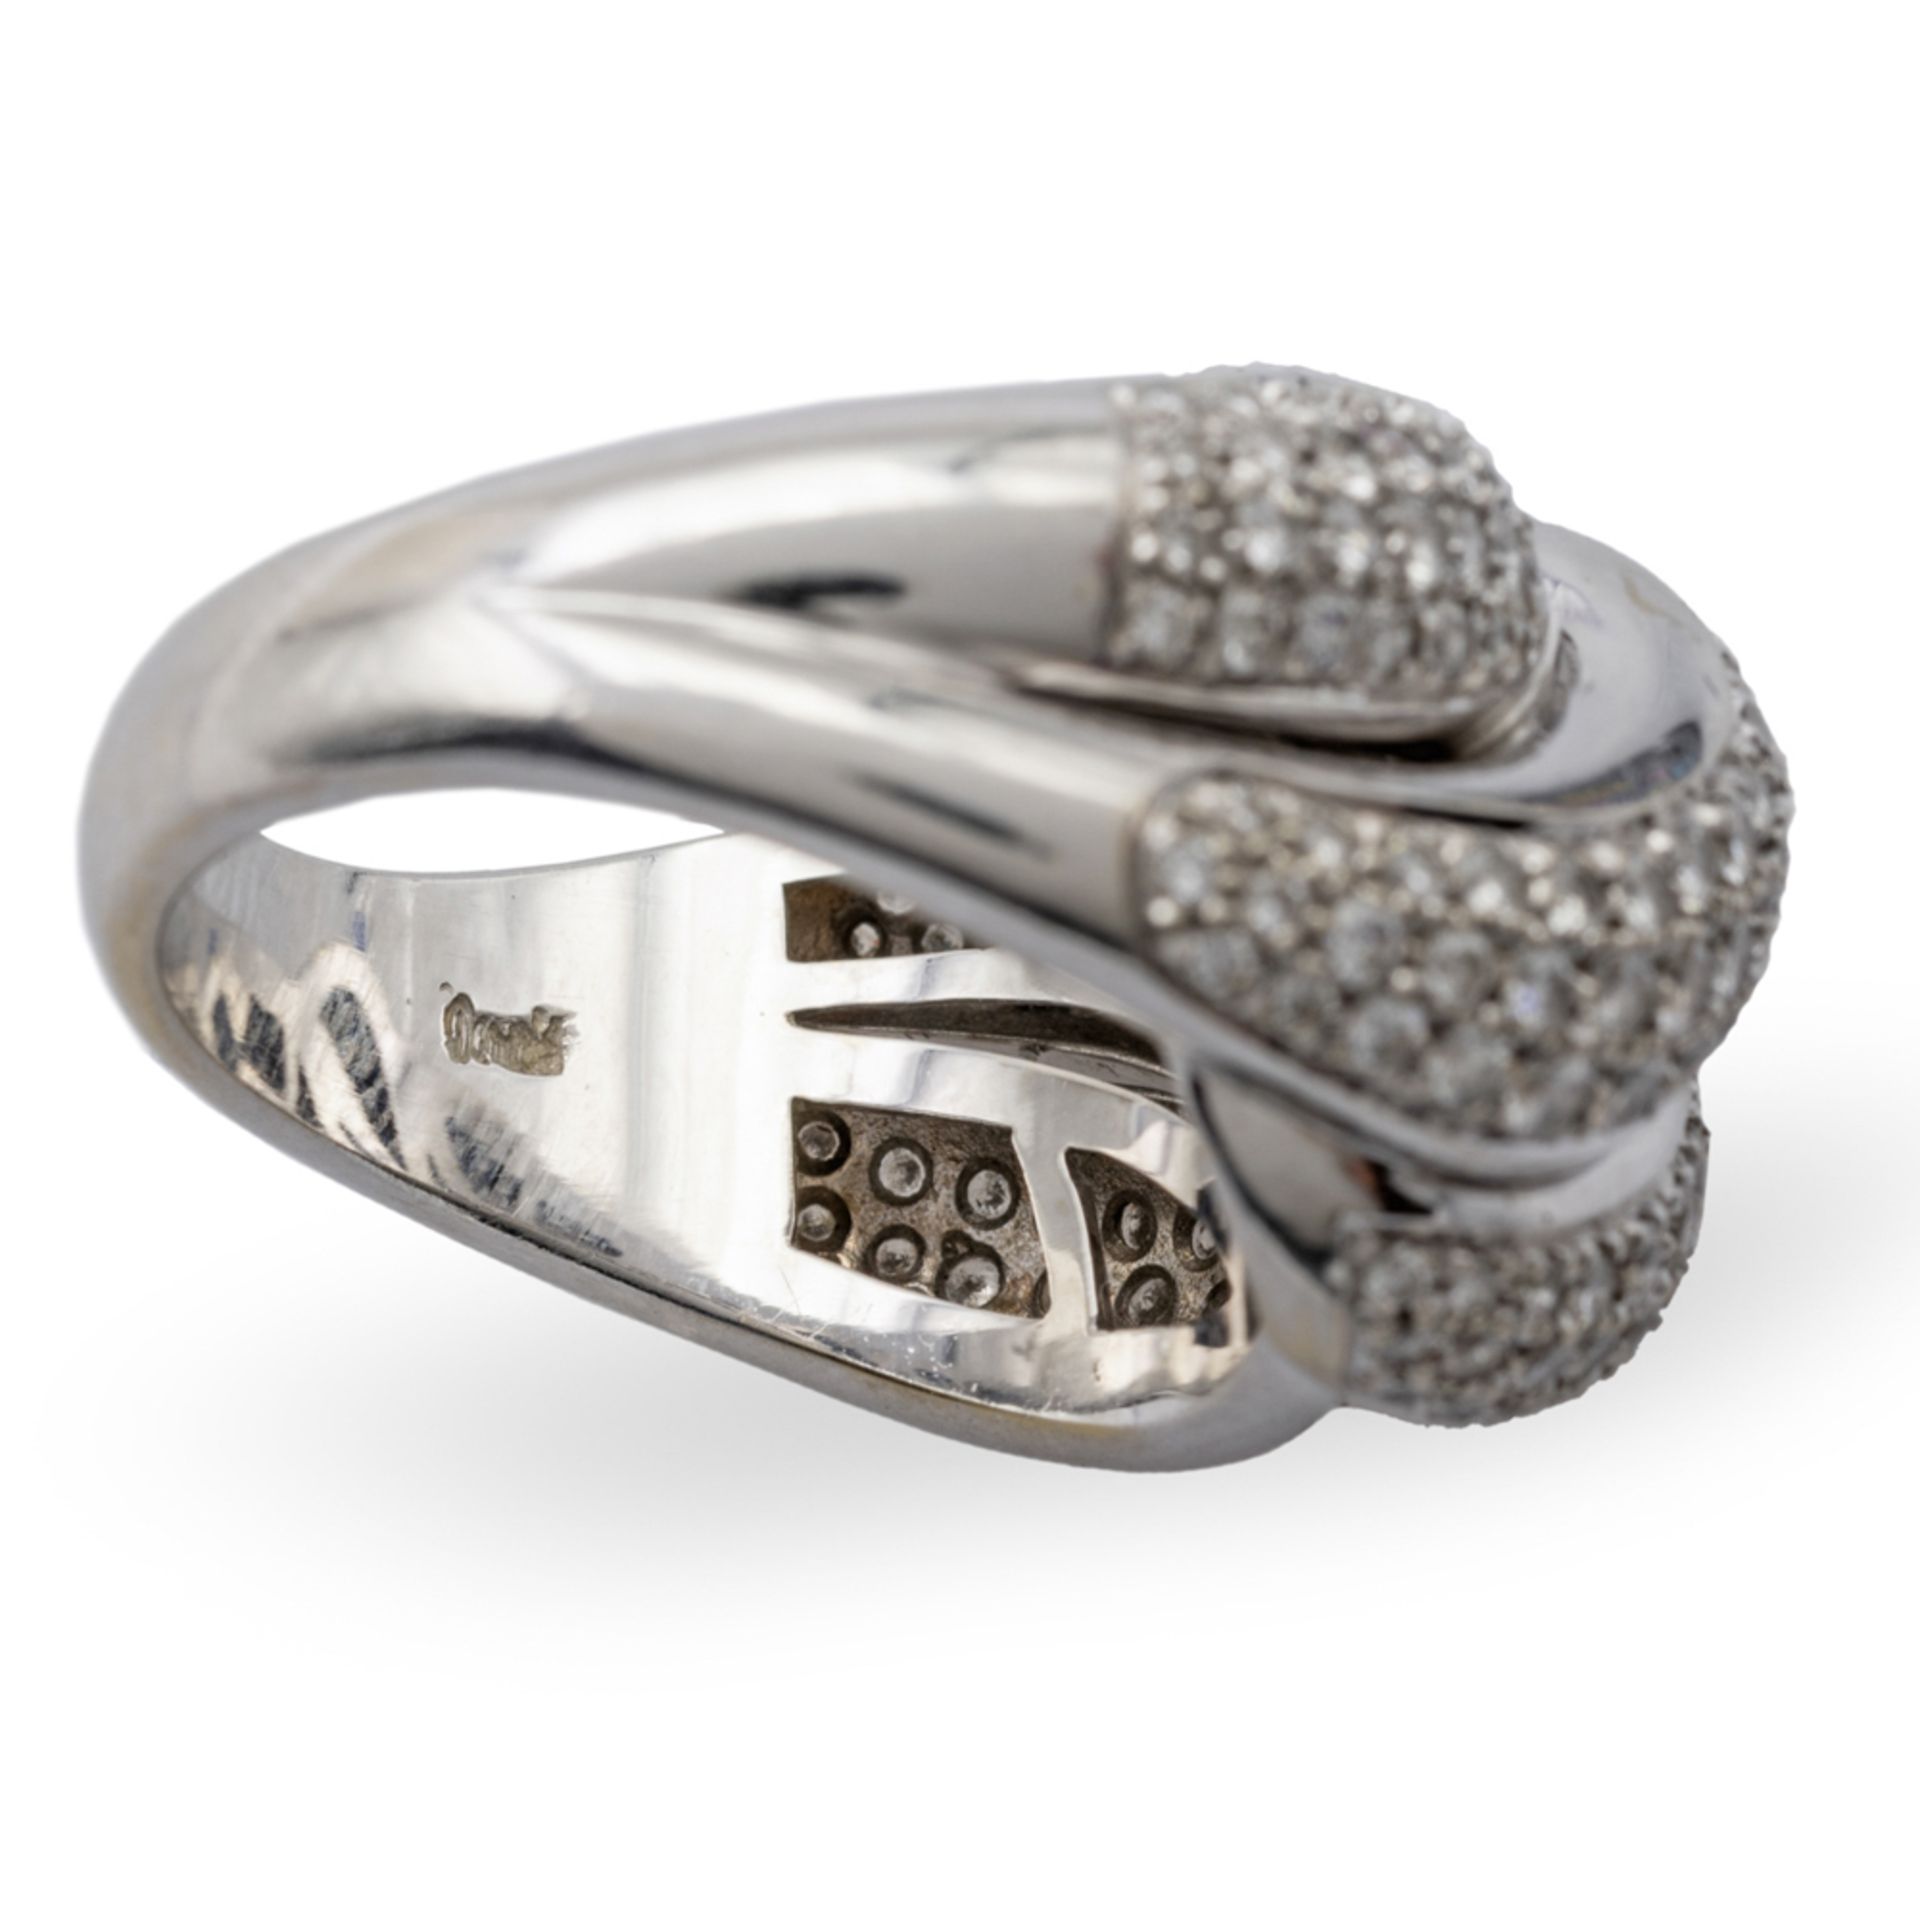 Damiani Gomitolo collection ring - Image 2 of 2